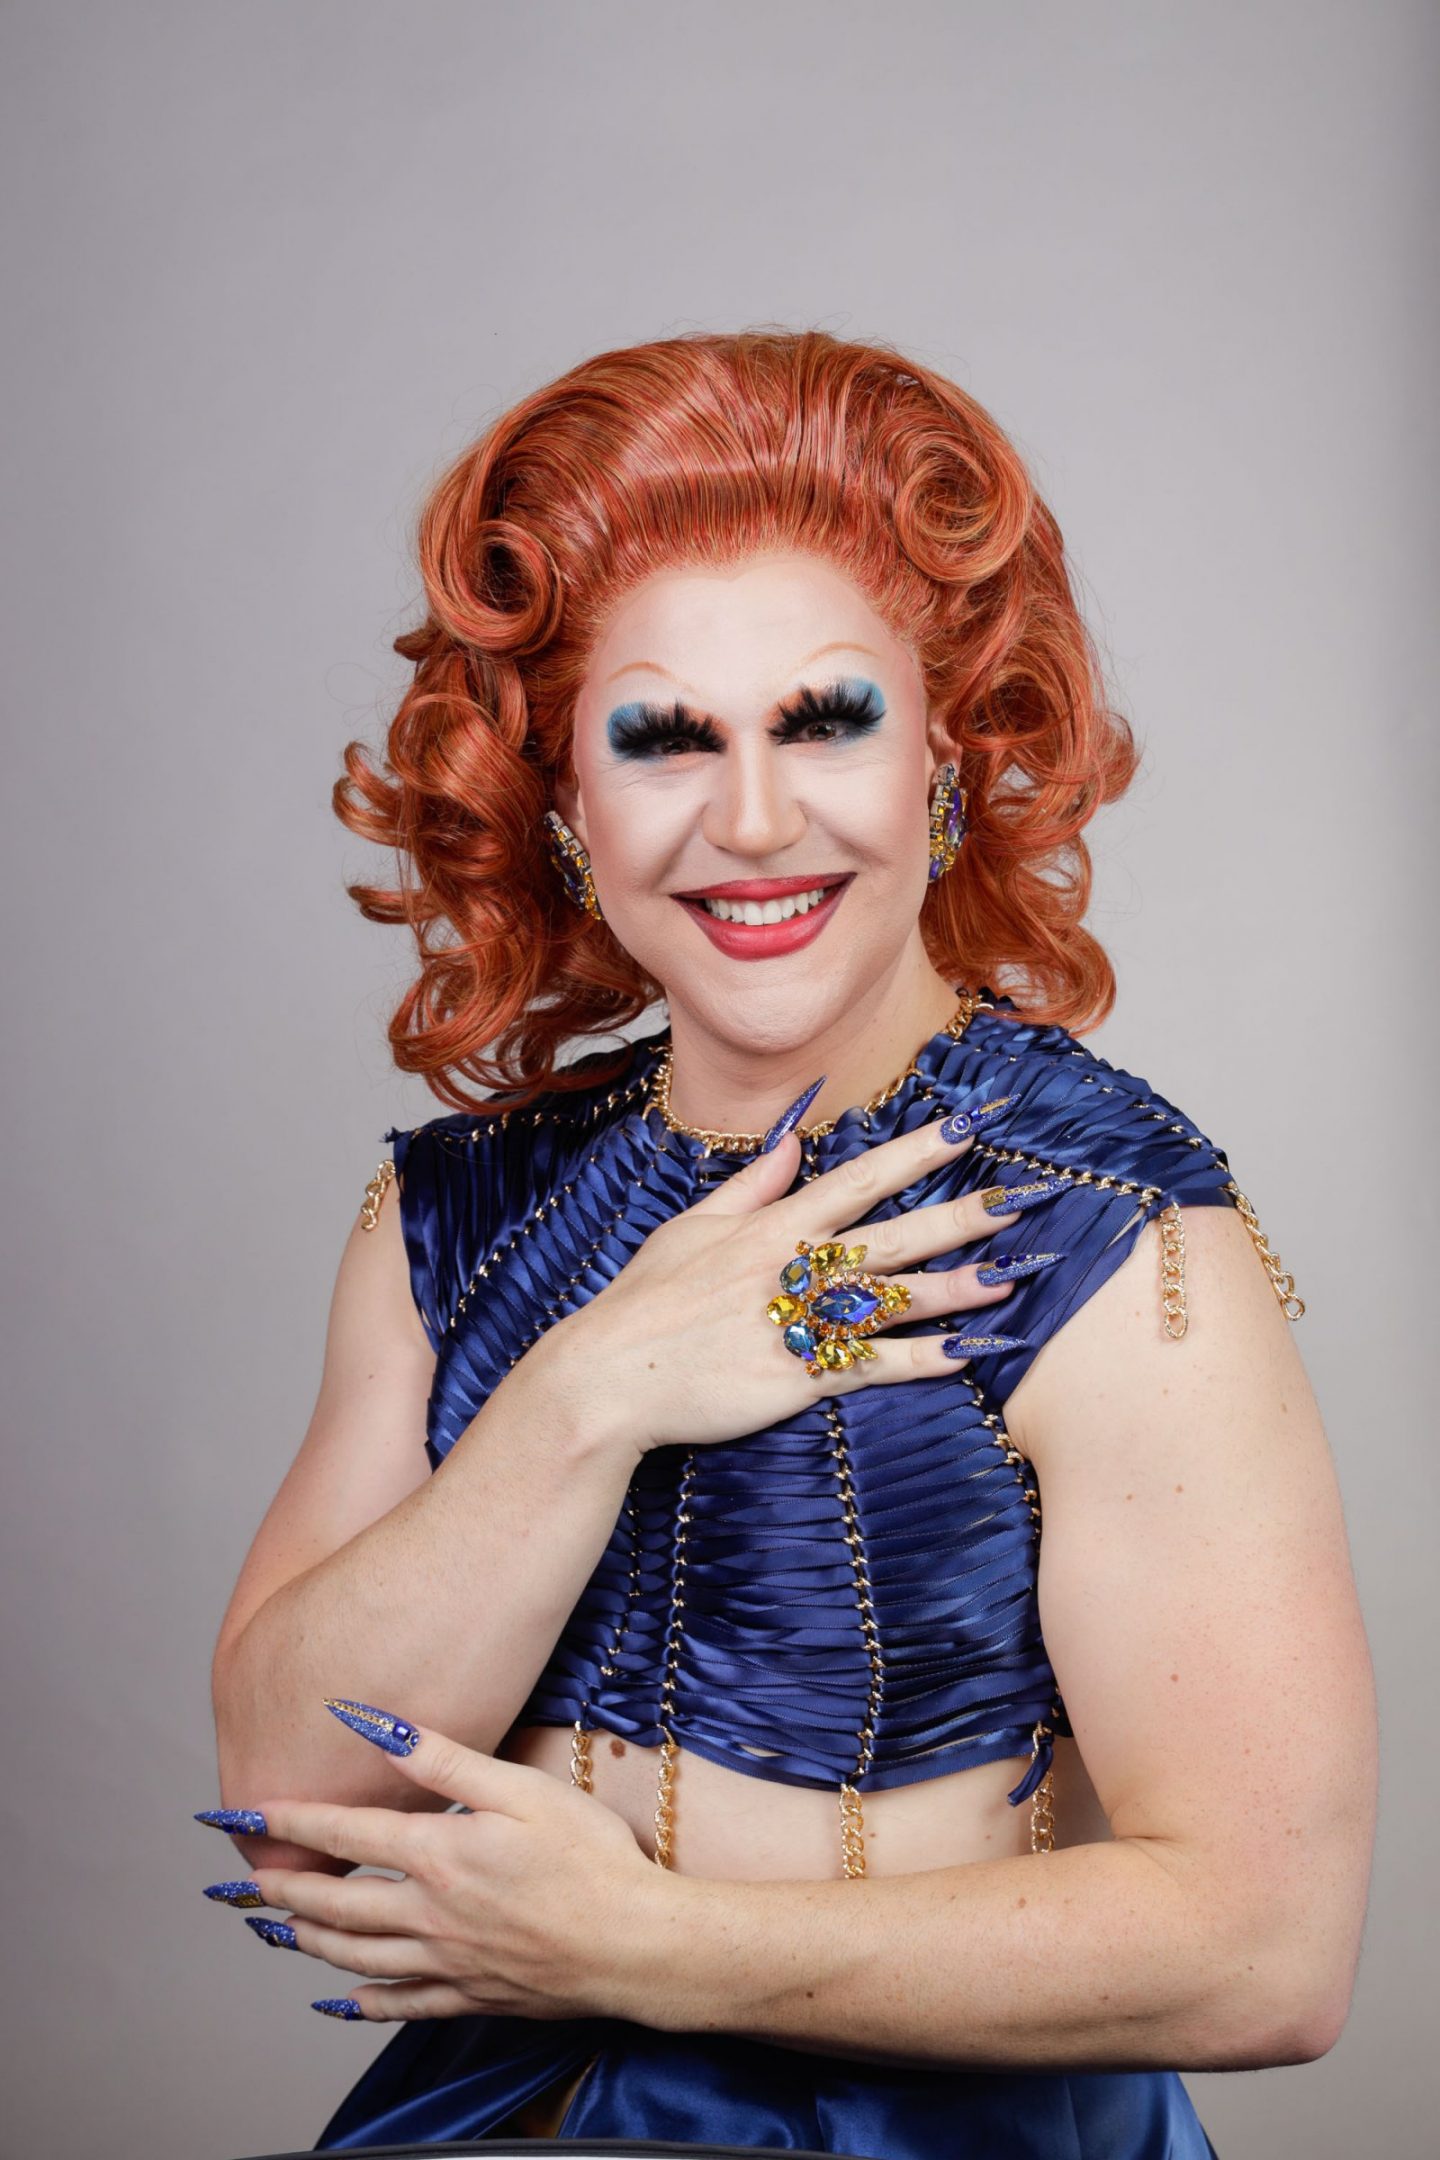 Portrait of drag performer Rowena Whey. She has orange coiffed hair, wears a navy blue dress. She wears long nails and a large ring, matching her dress.